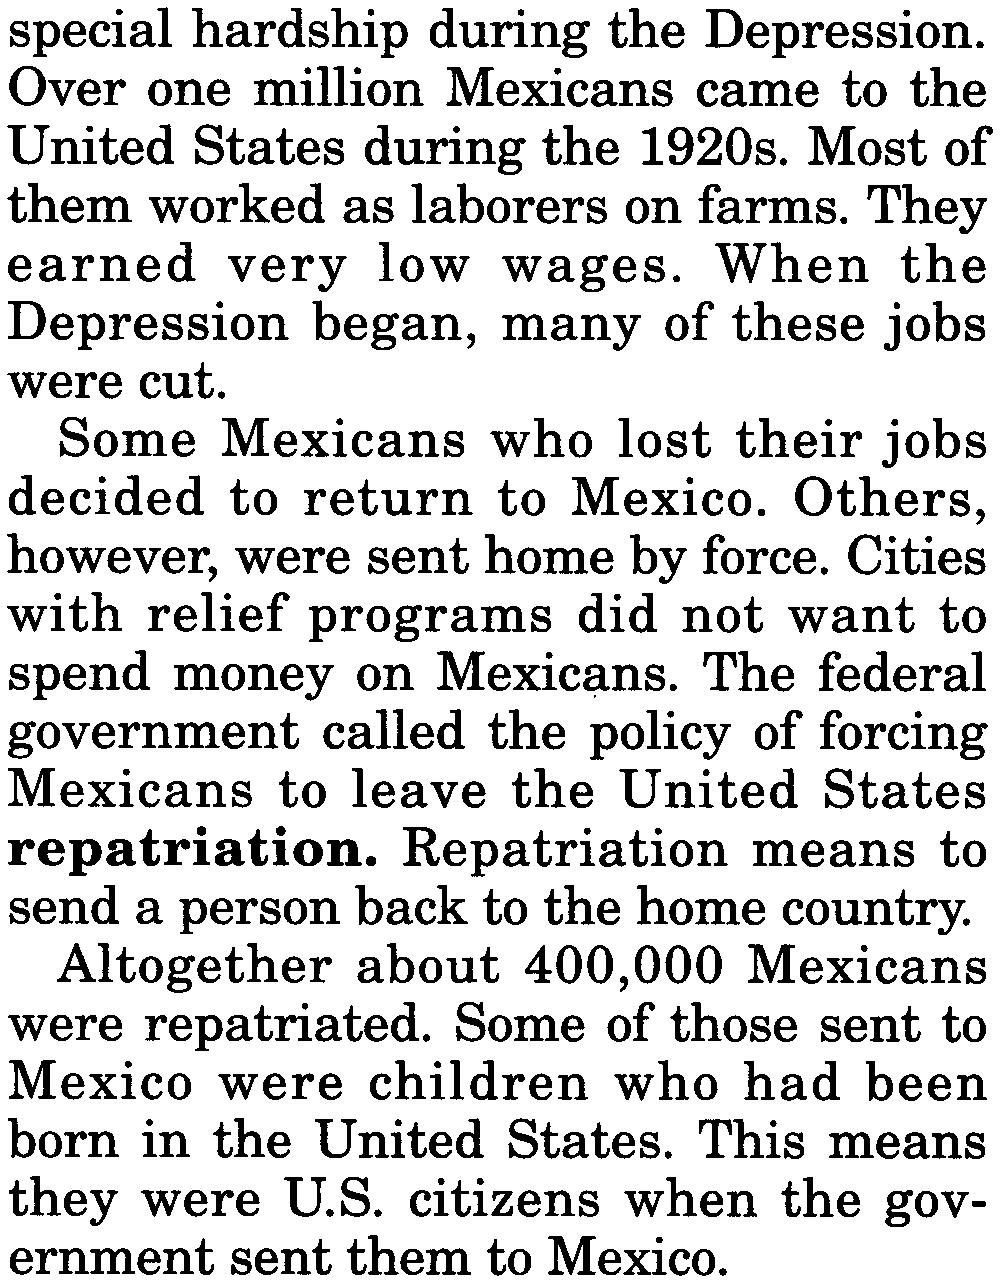 Mexican American farm workers suffered greatly during the Depression. When migrant workers struck because of bad conditions, the state sent in police, rather than food.